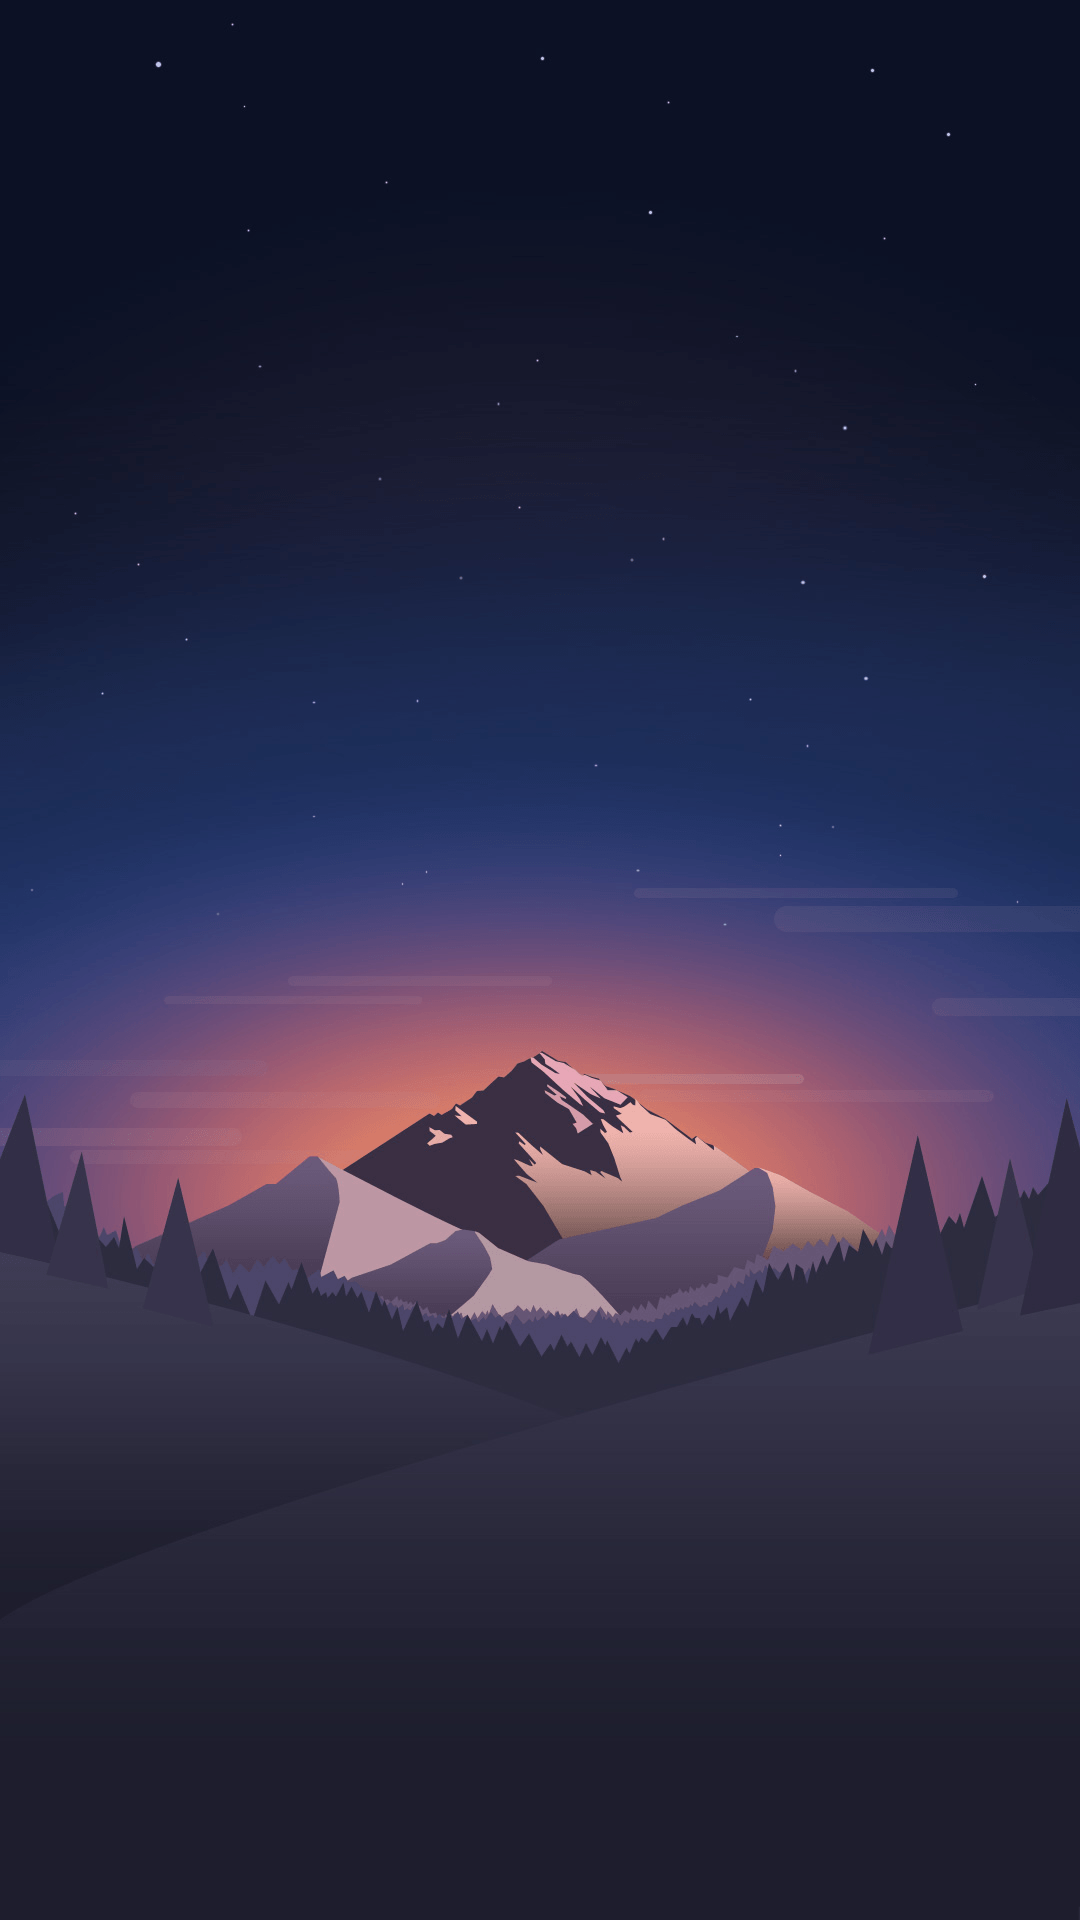 Mountain in night. Tap for landscape in material design iPhone